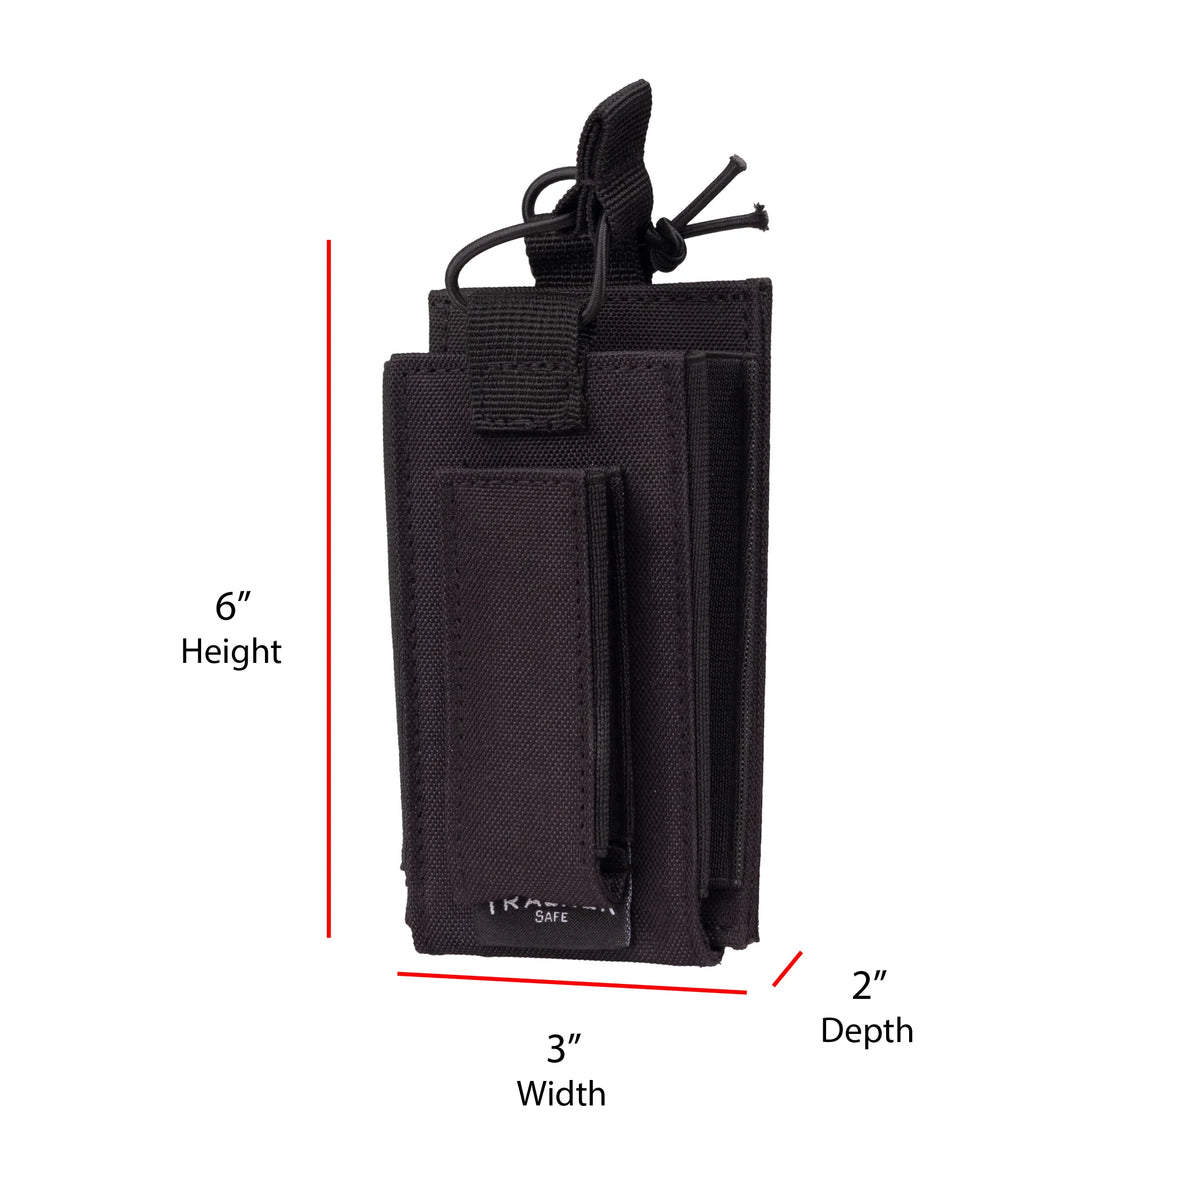 Tracker PDM Pocket Double Magazine Dimensions